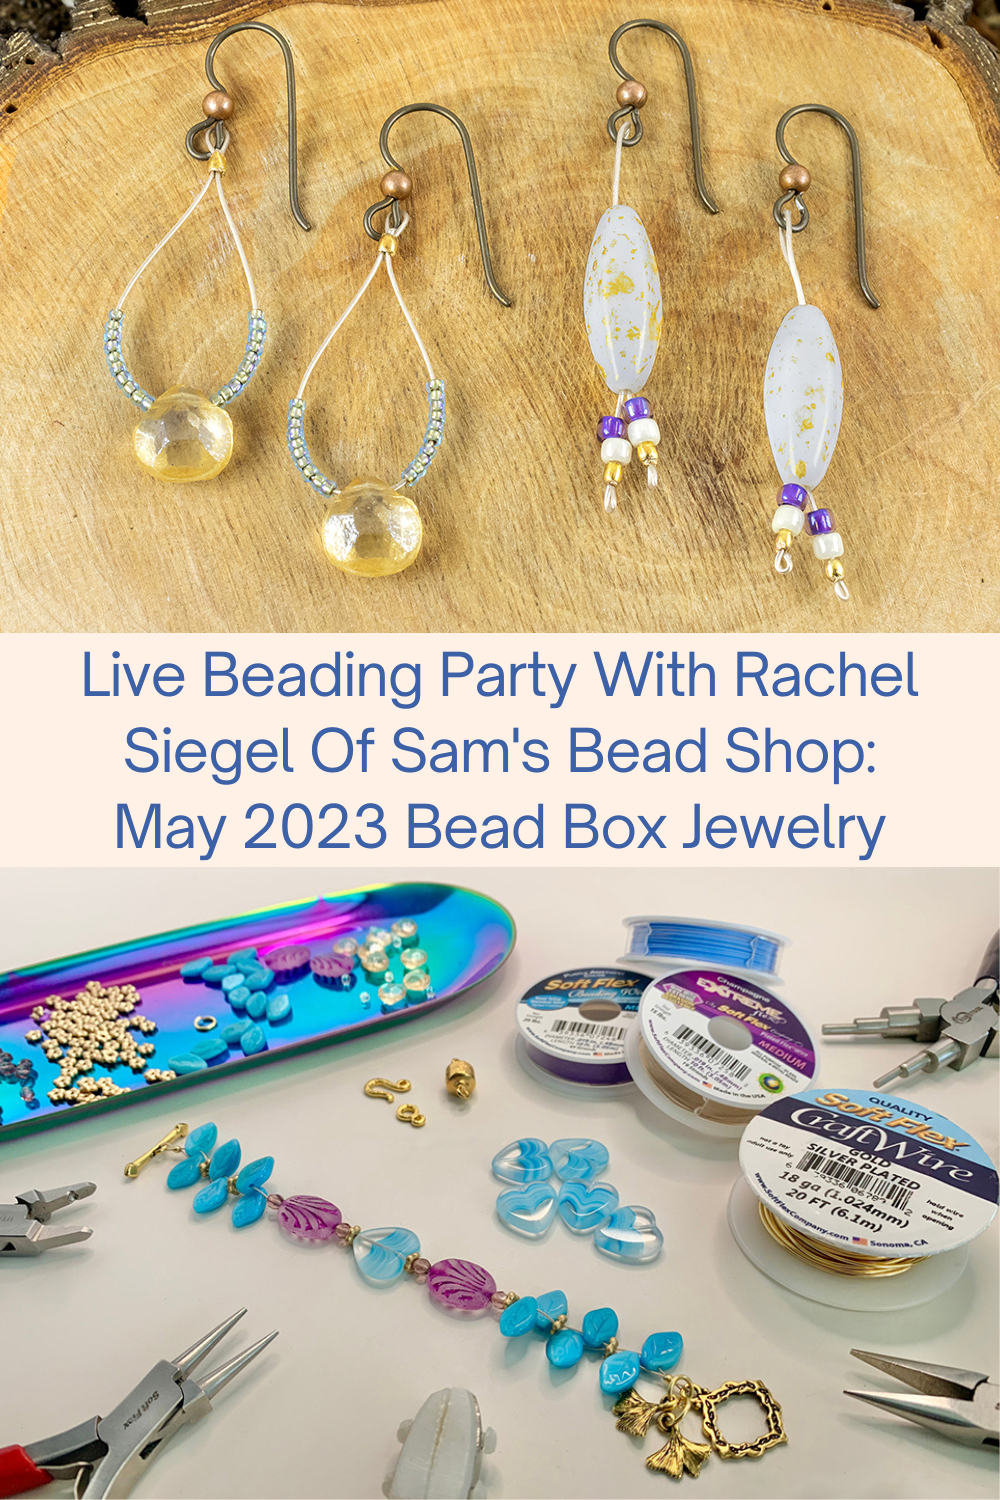 Live Beading Party With Rachel Siegel Of Sam's Bead Shop May 2023 Bead Box Jewelry Collage